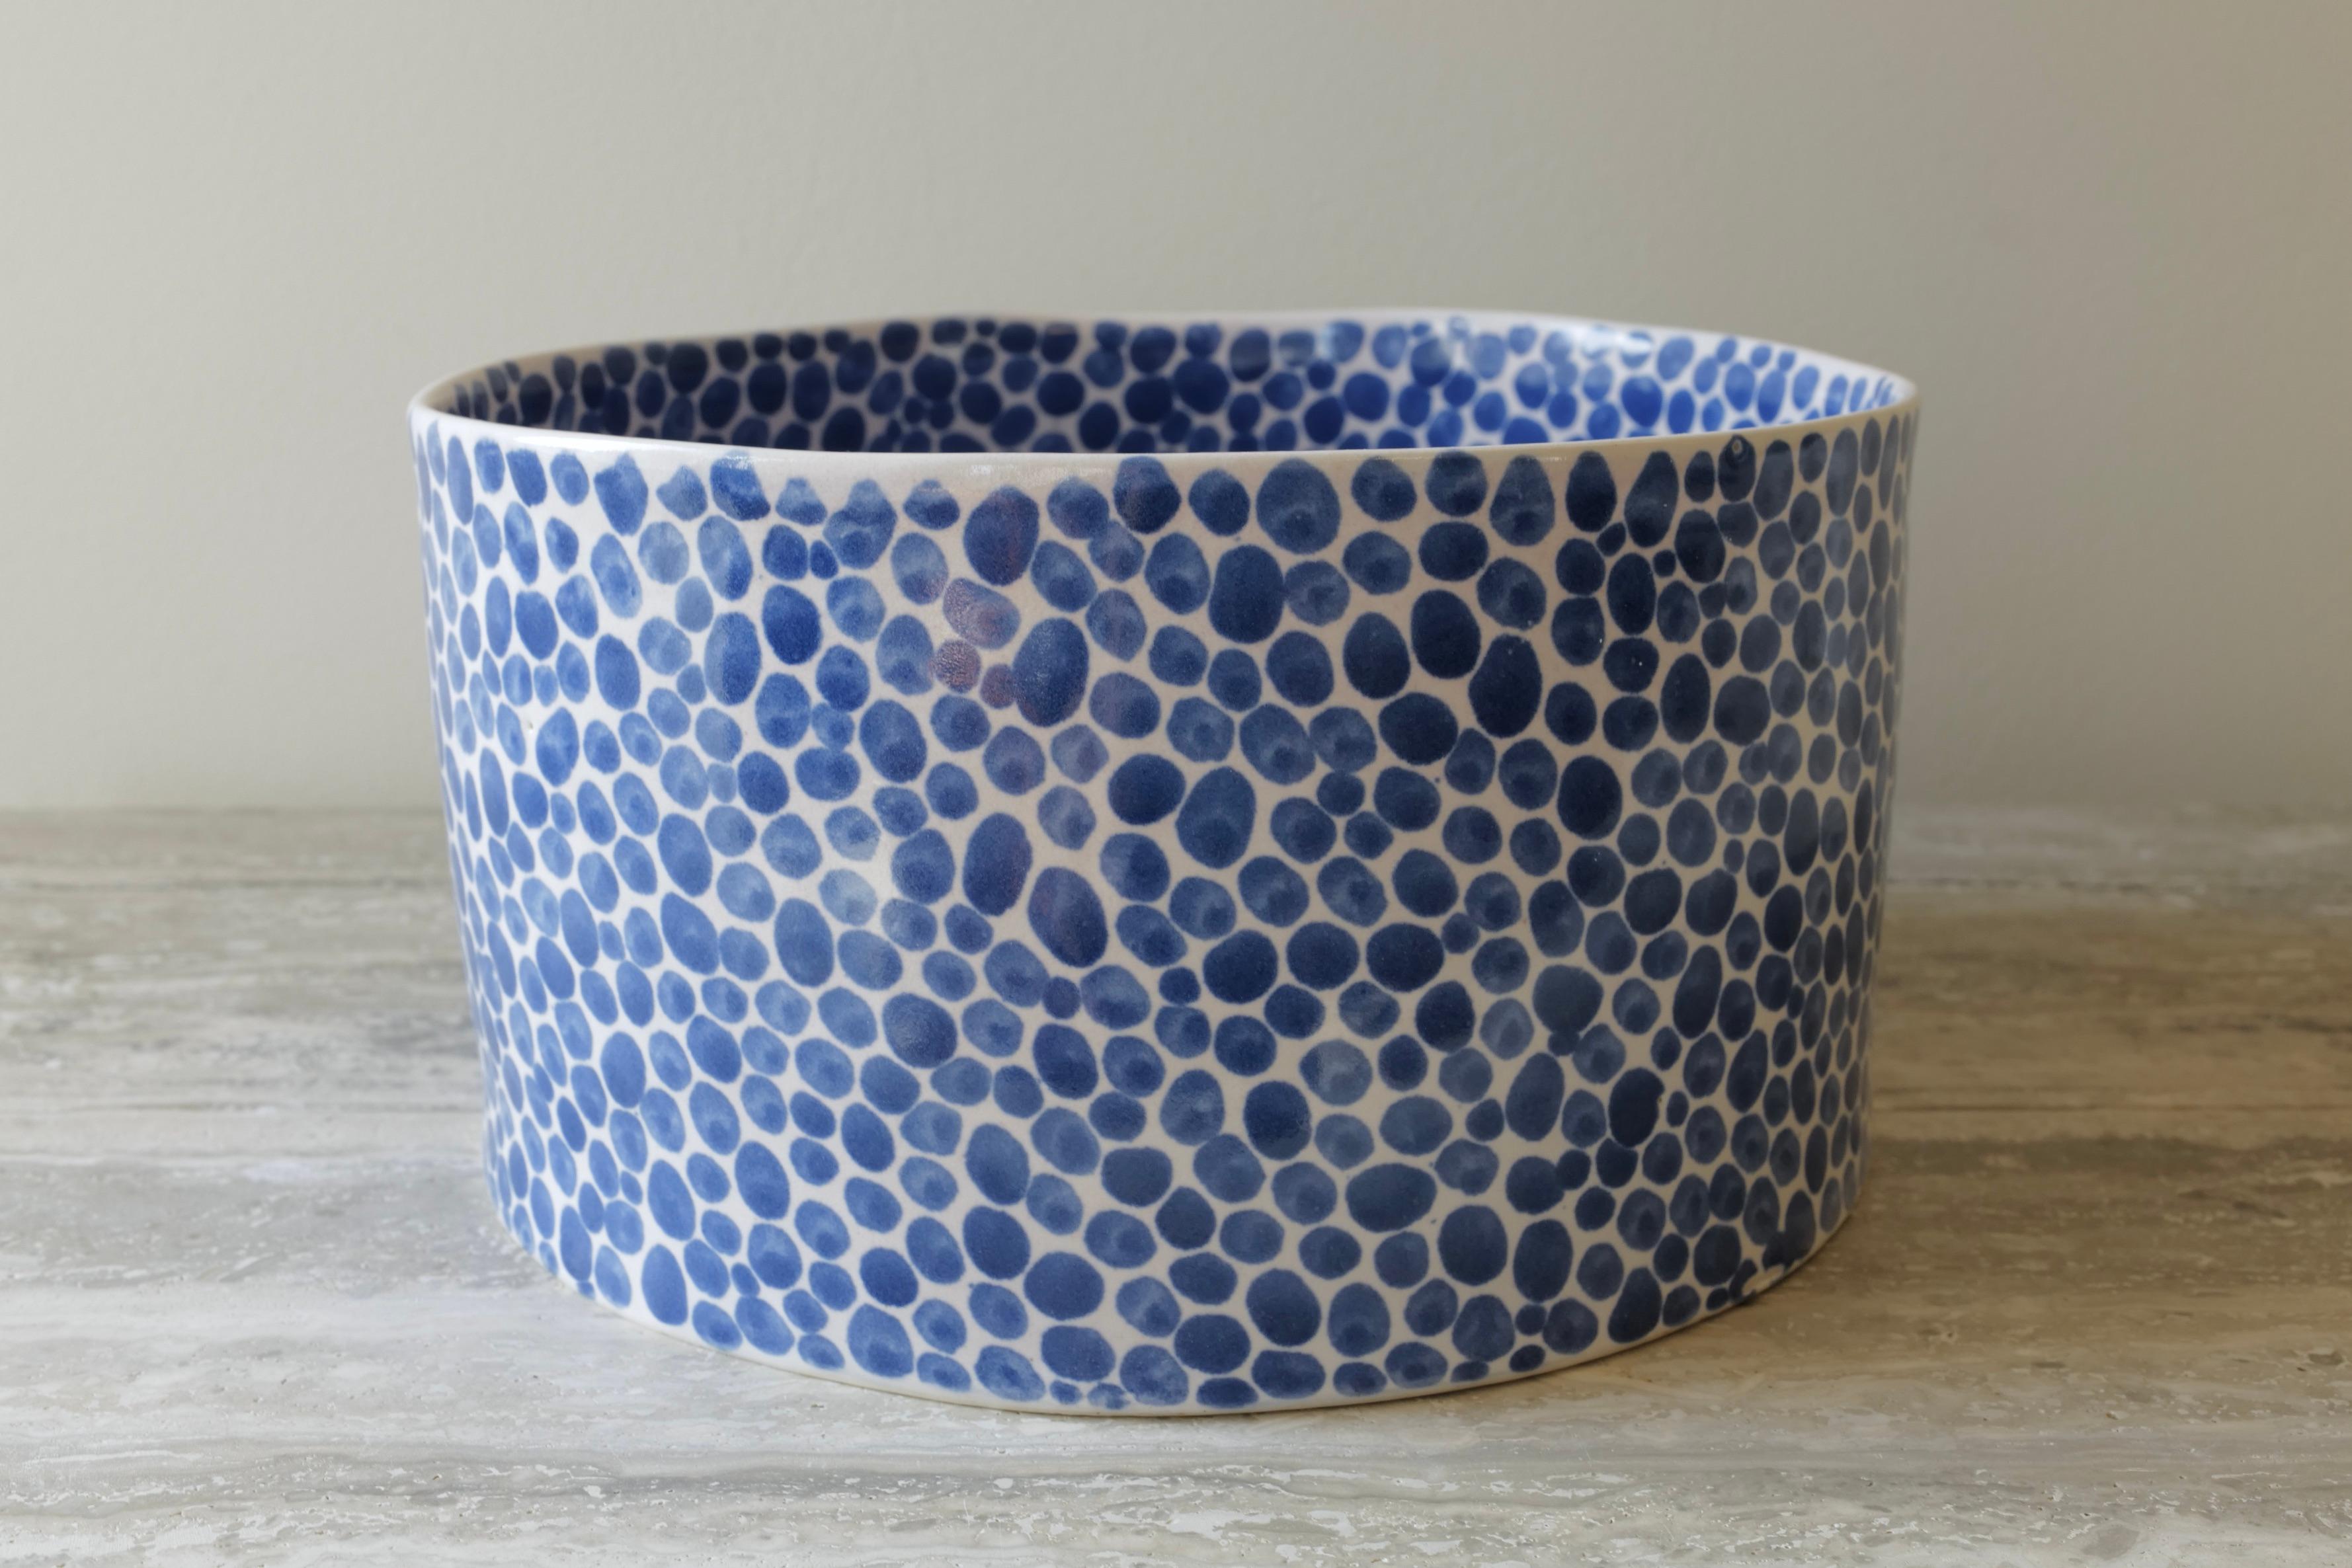 North American Blue Dots Wide Deep Porcelain Bowl by Lana Kova For Sale